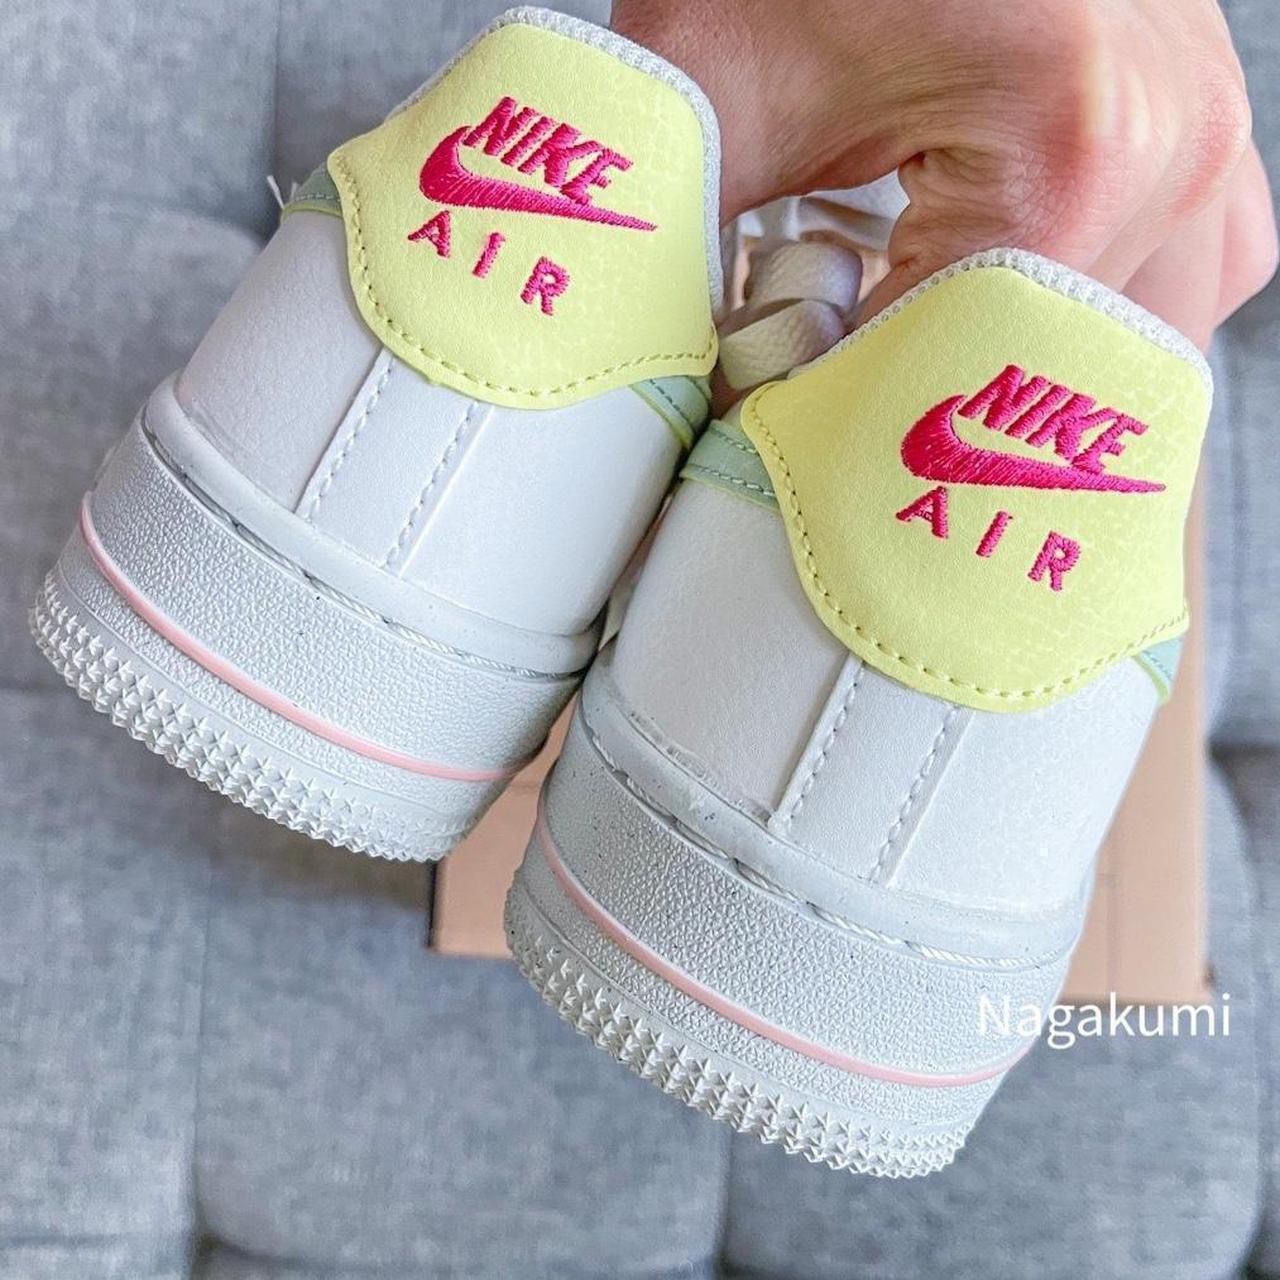 Nike Air Force 1 Low '07 'Volt SIZE: 6Y (YOUTH) for Sale in Burlington, WA  - OfferUp